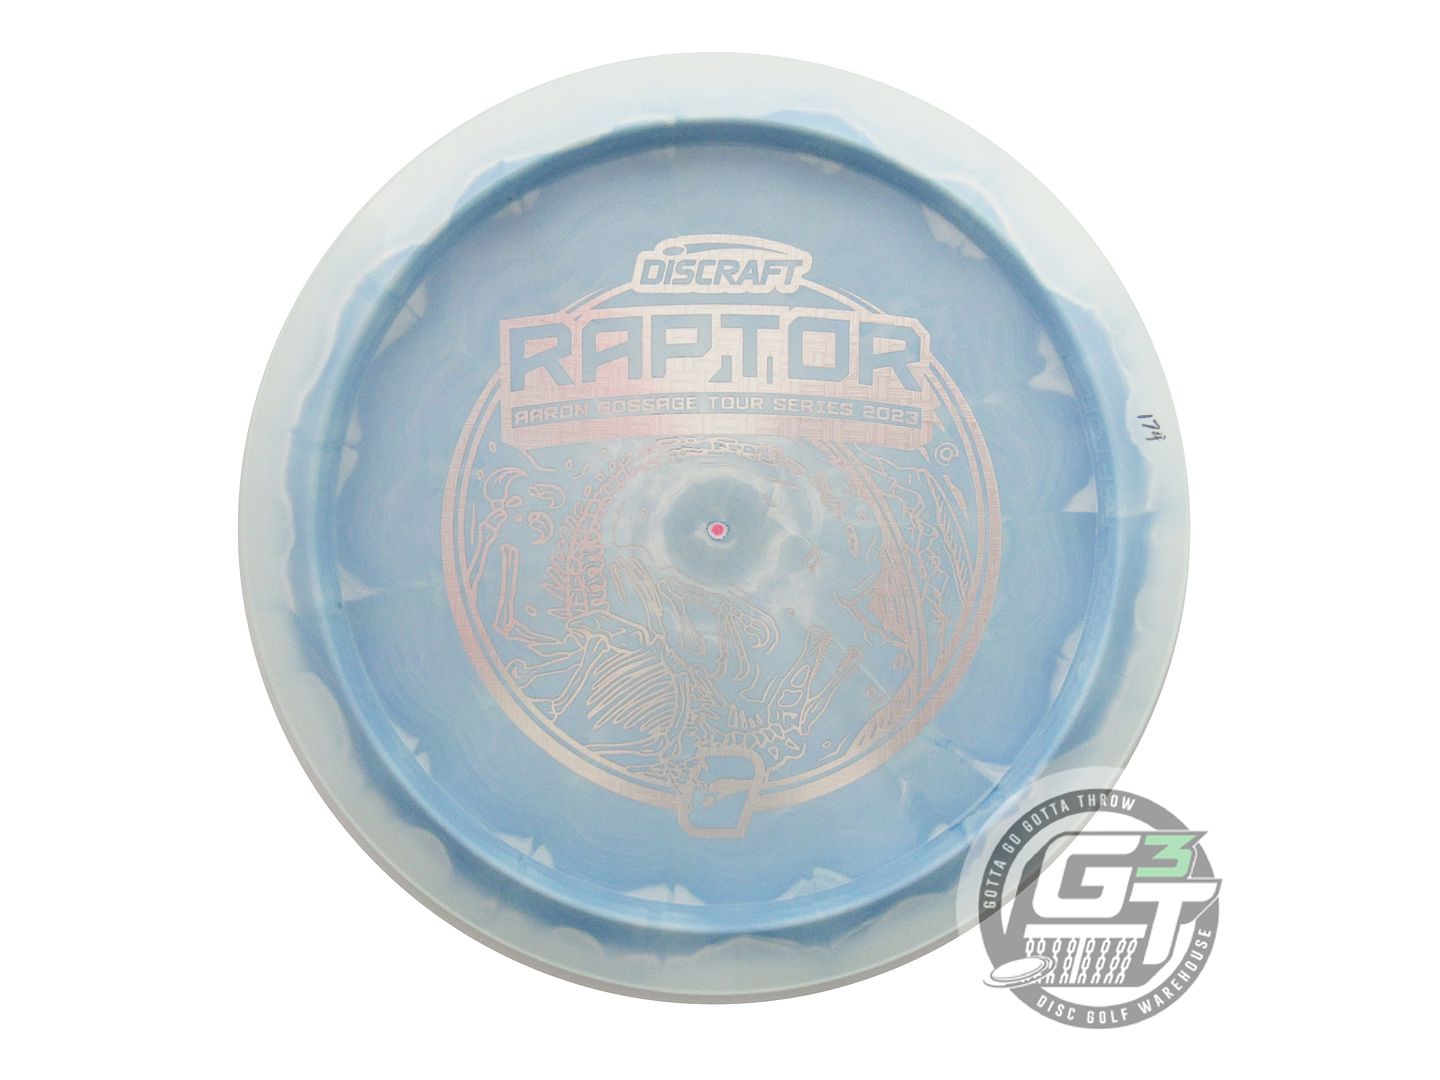 Discraft Limited Edition 2023 Tour Series Aaron Gossage Understamp Swirl ESP Raptor Distance Driver Golf Disc (Individually Listed)